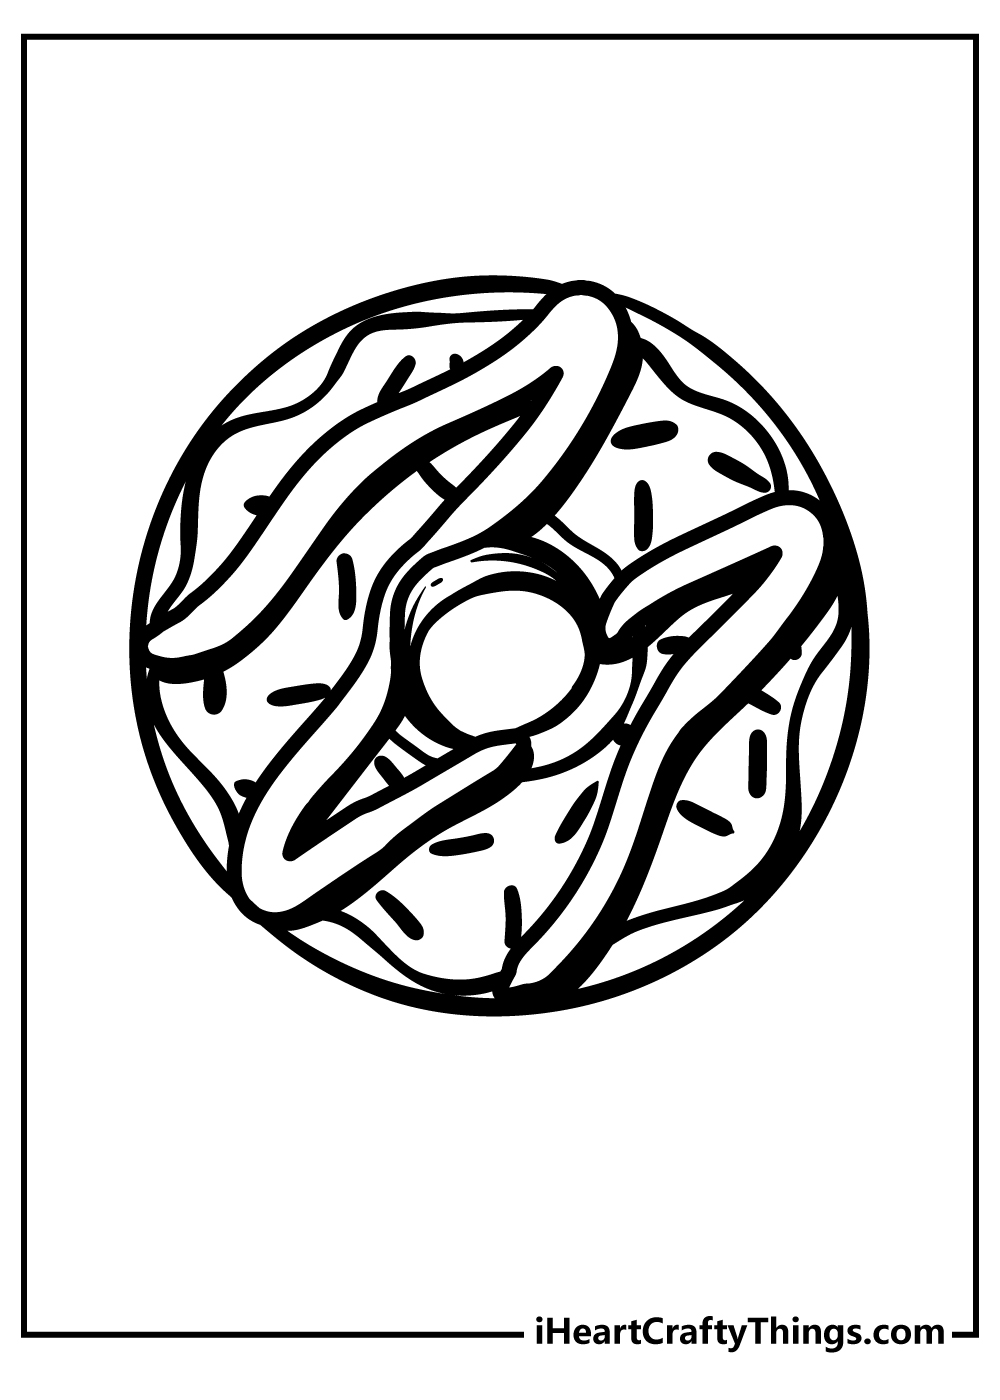 Donut Easy Coloring Pages